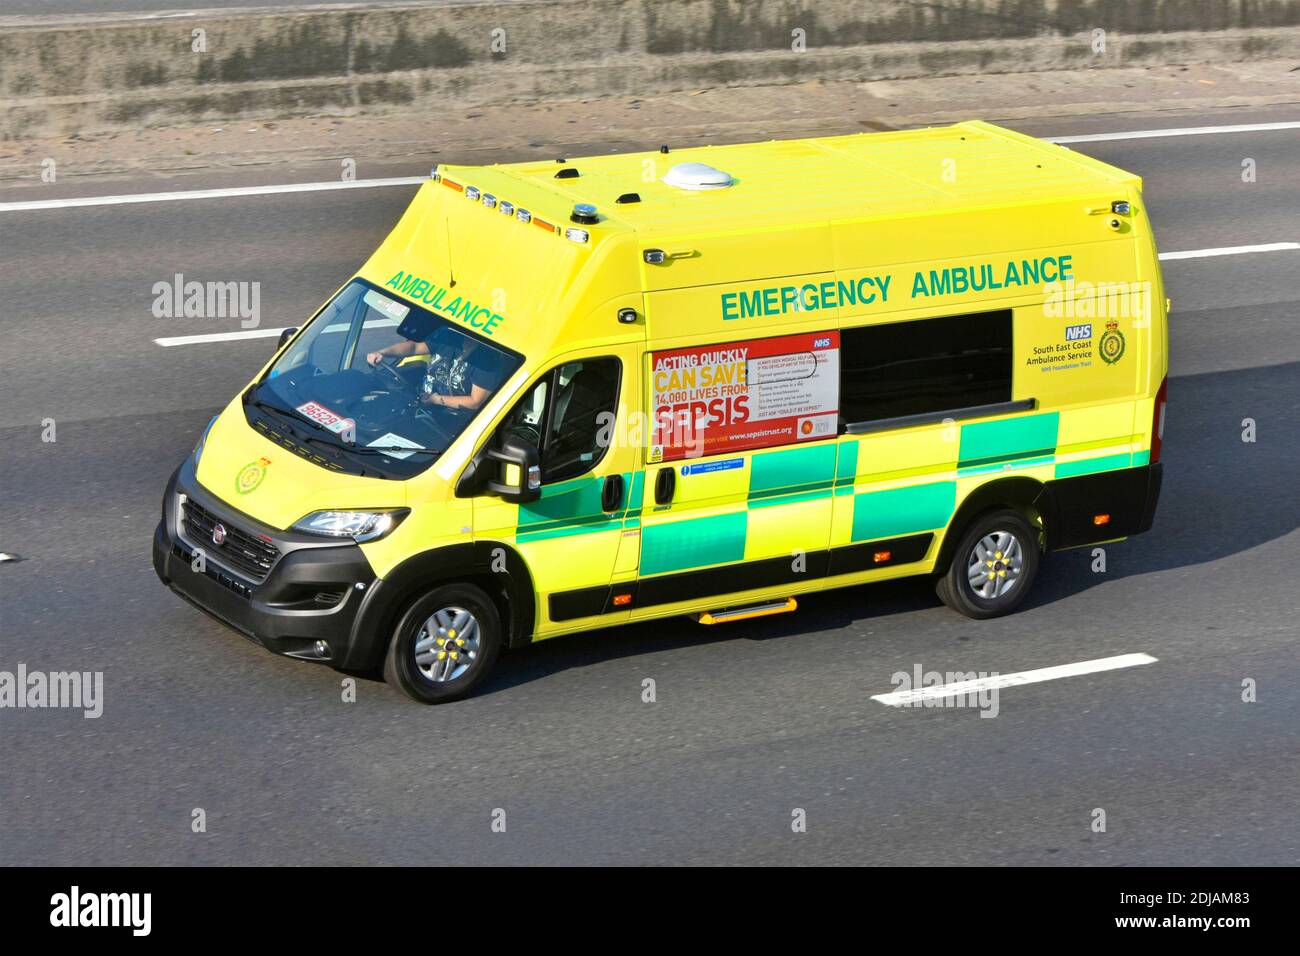 South East Coast NHS national health service emergency ambulance with Sepsis  information advert Fiat vehicle driving on trade plates on UK motorway Stock Photo